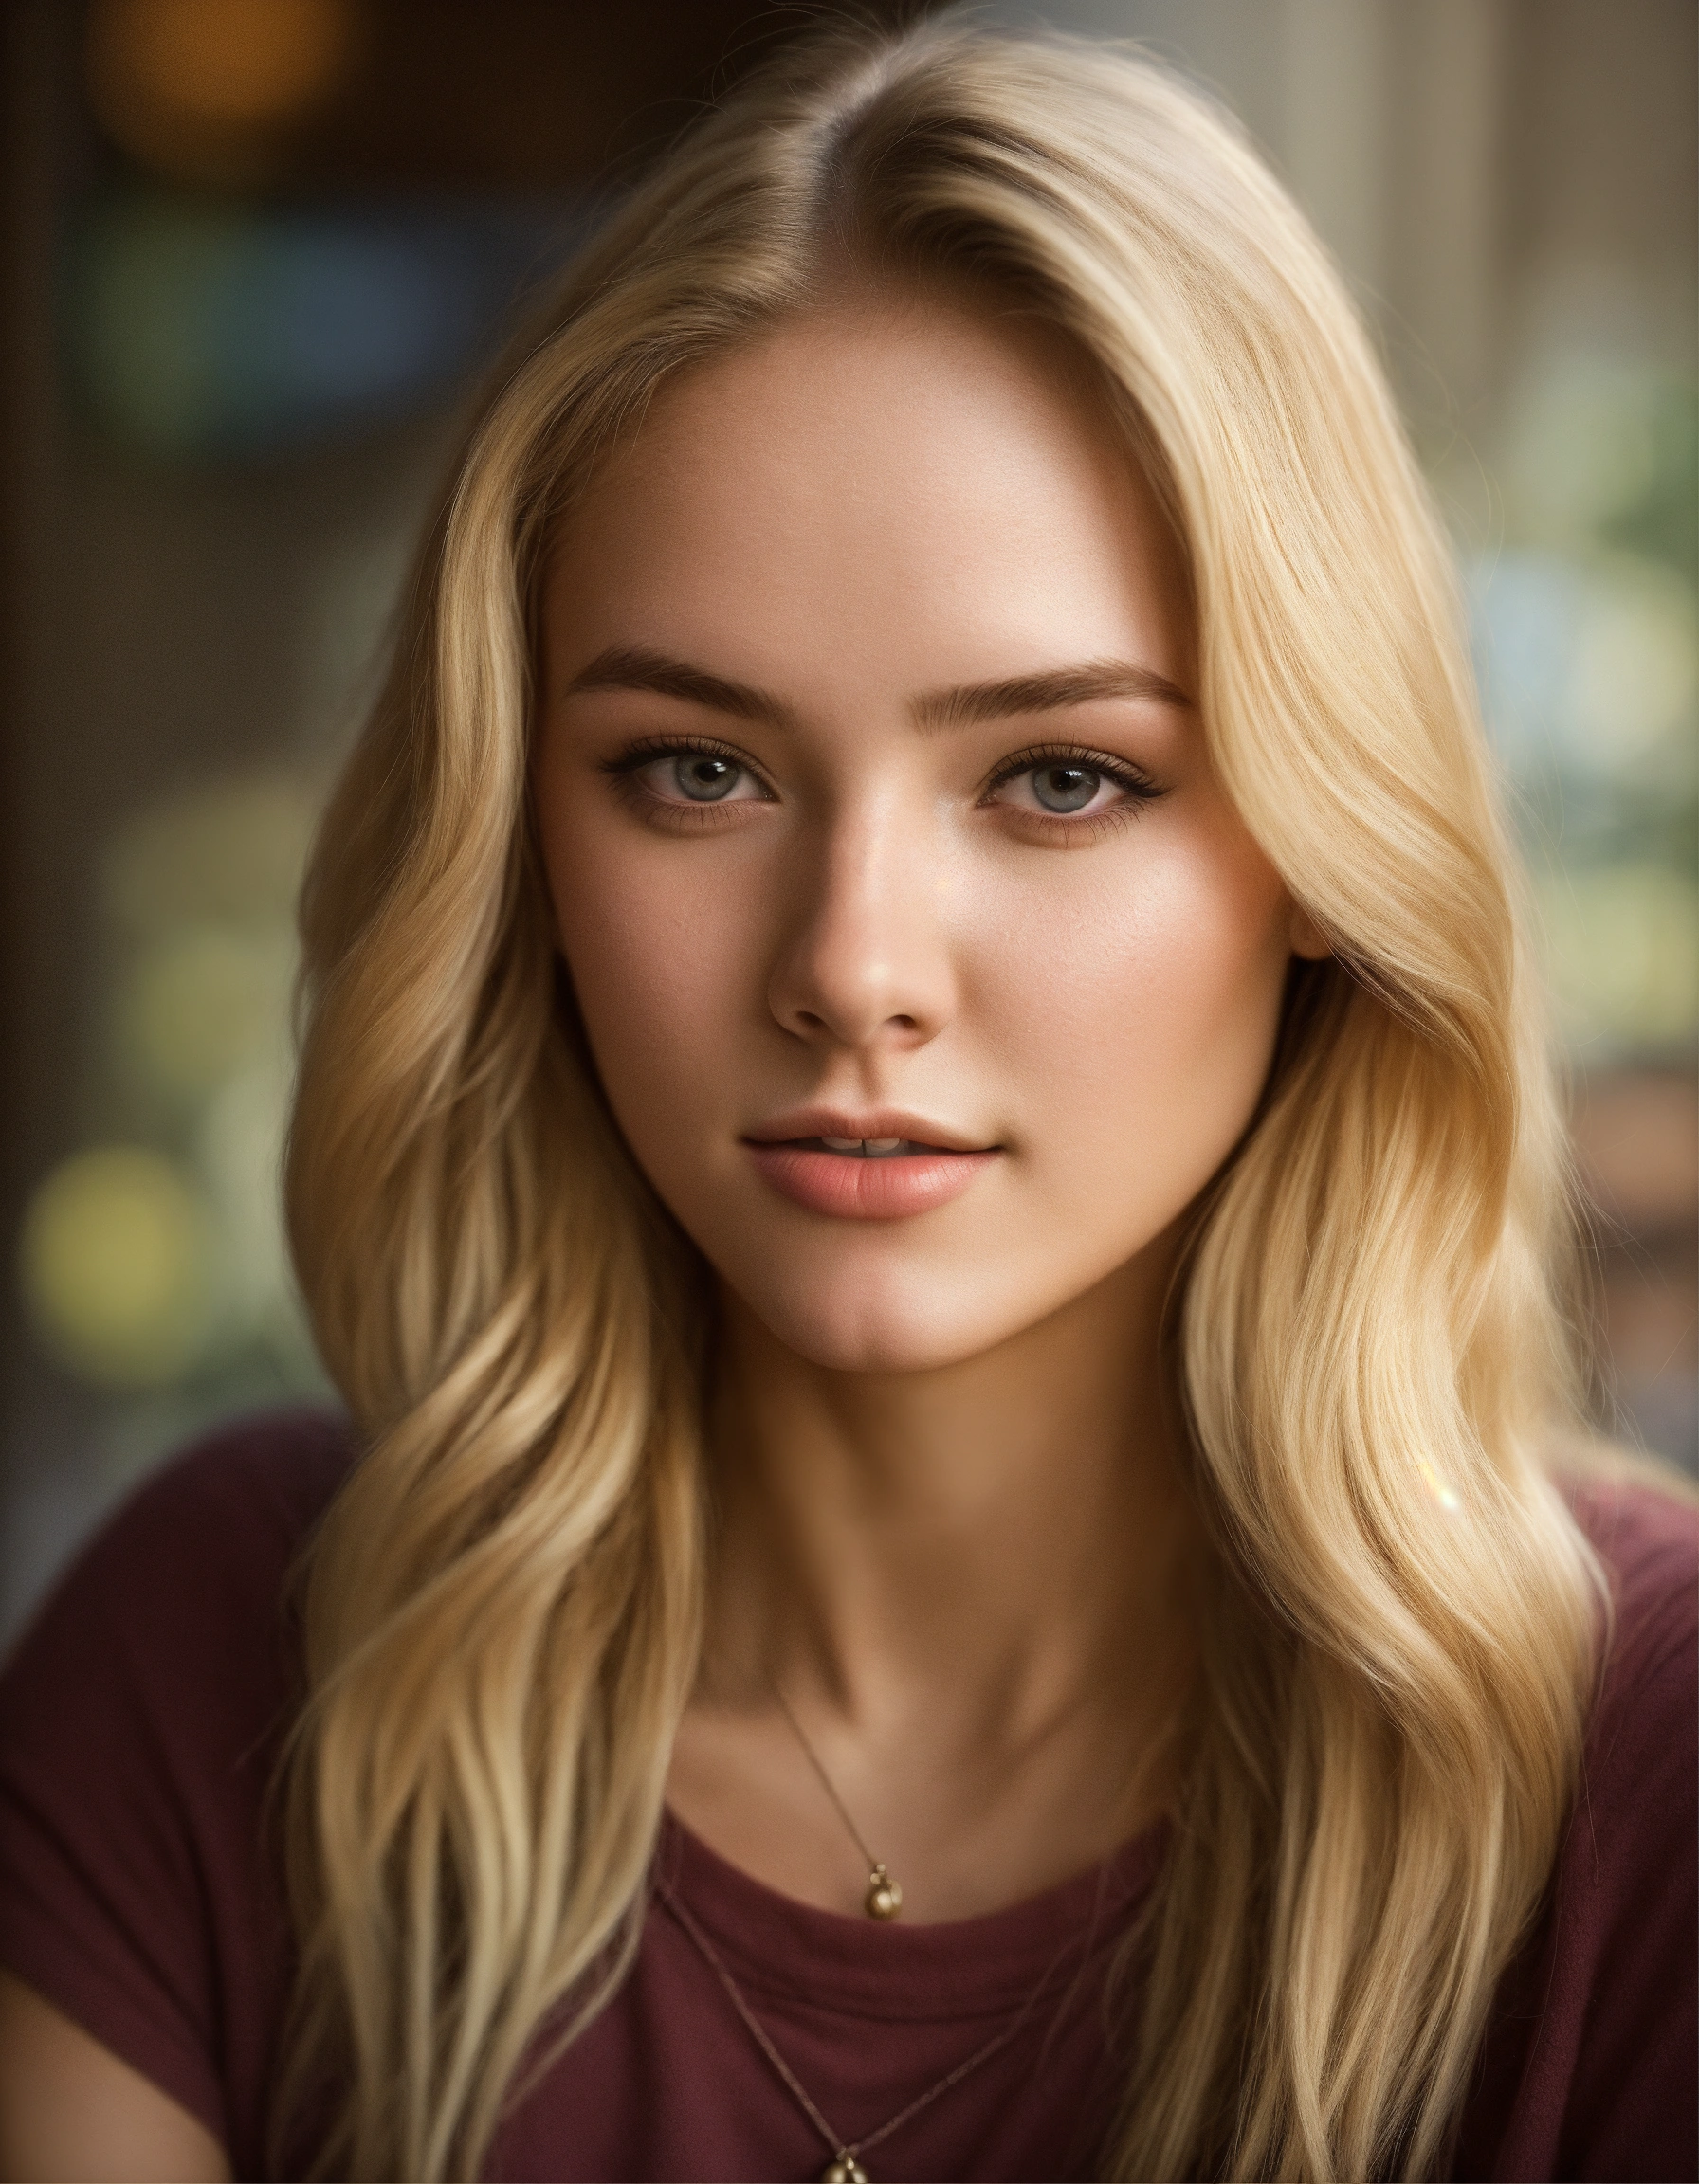 Lexica Portrait Of A Blonde College Girl Photorealistic